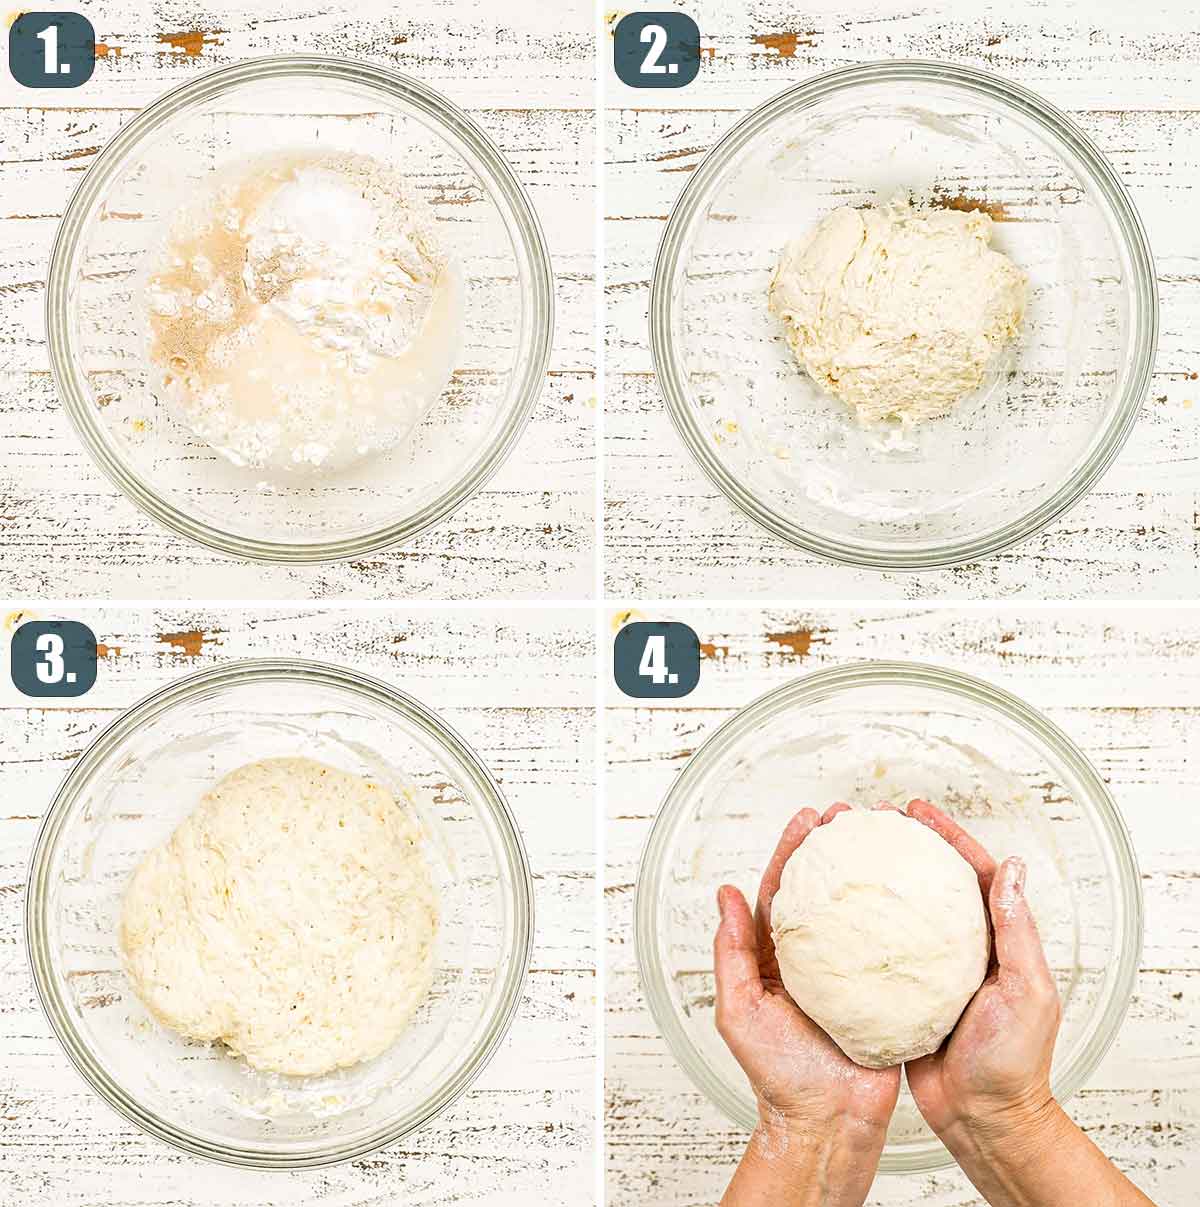 process shots showing how to make dough for no knead bread.